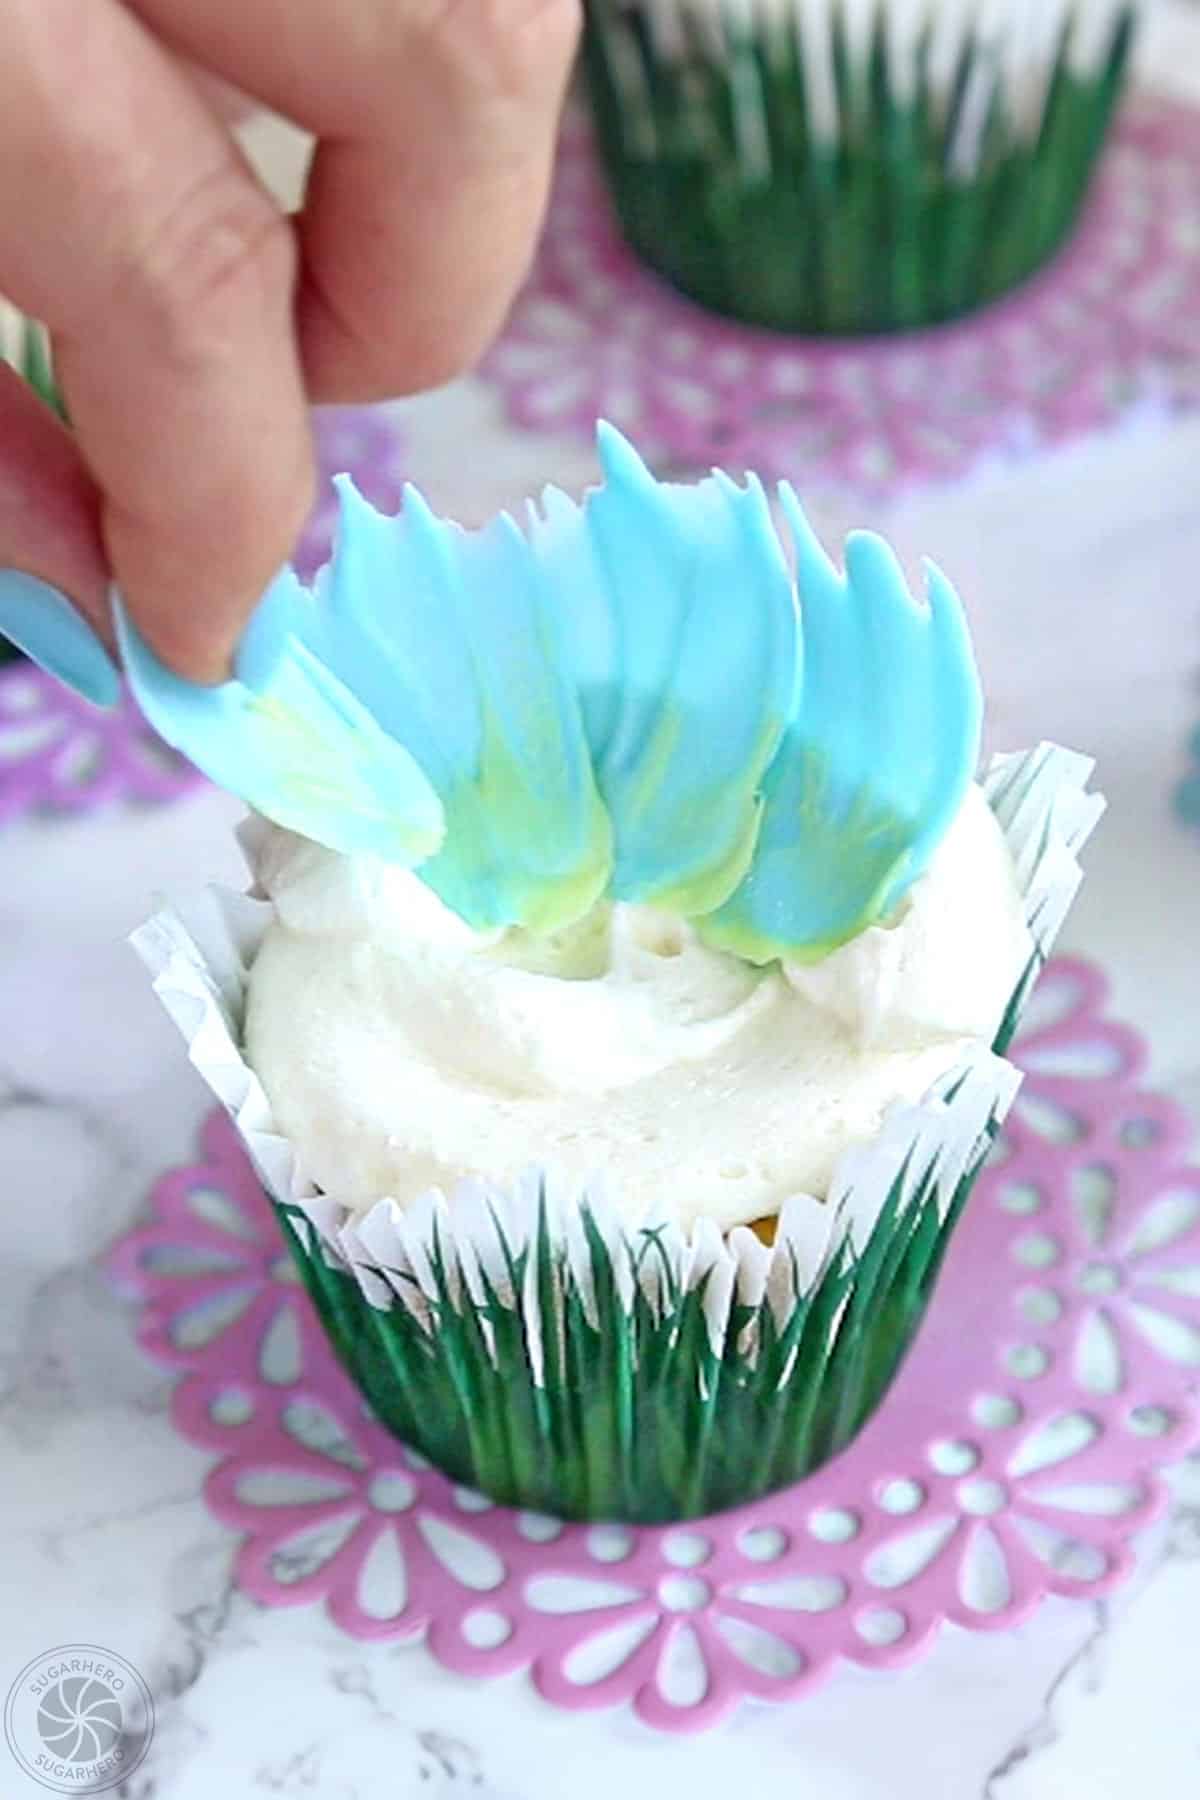 Placing blue candy melt petals on top of a buttercream-covered cupcake.